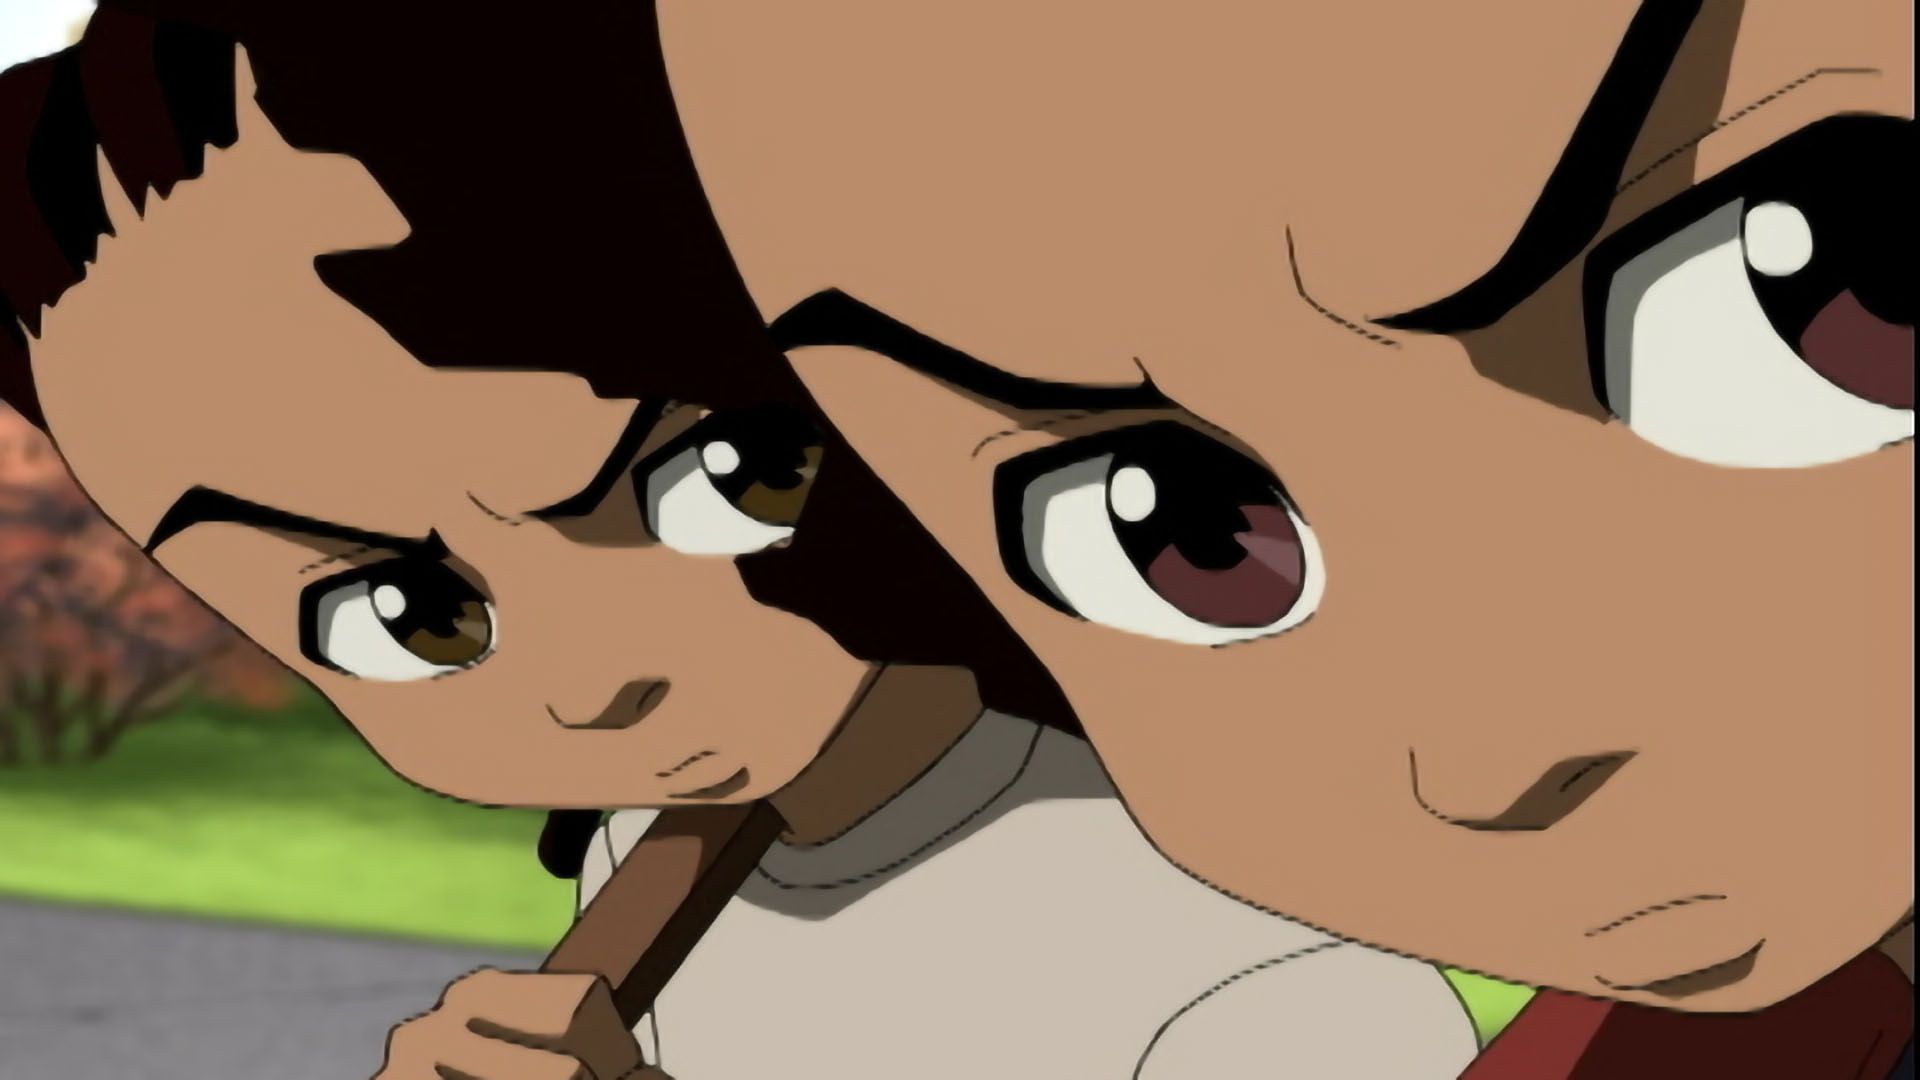 1920x1080 - The boondocks succeeds in unsettling viewers, but its controver...